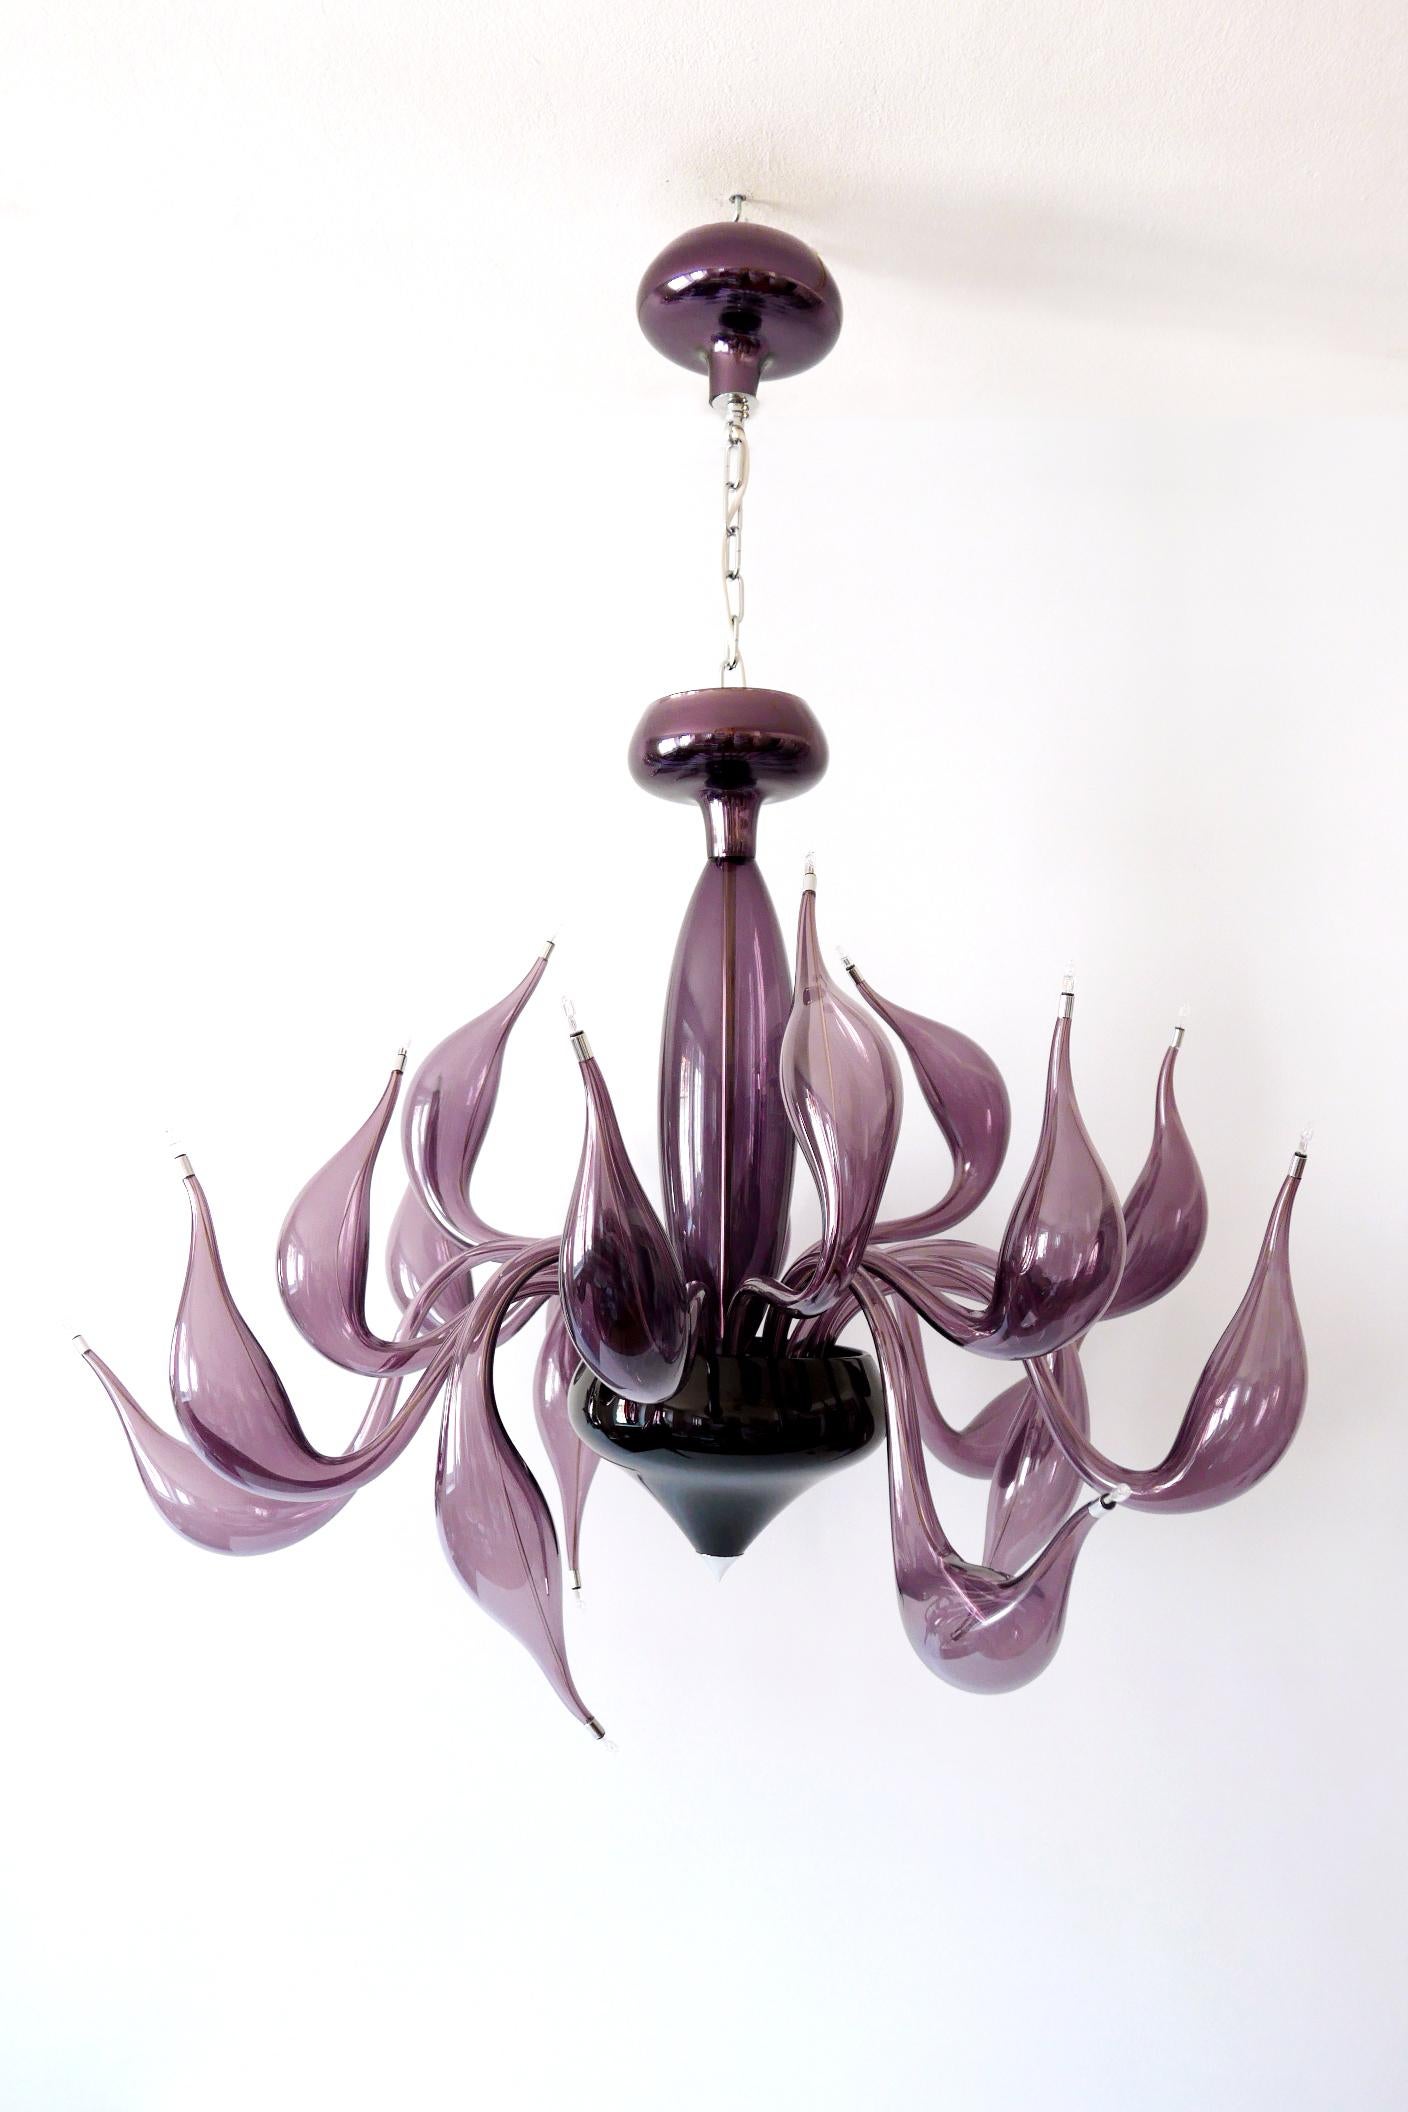 Sculptural Lu Murano Chandelier 18 Lights by Fabio Fornasier, 2004, Italy For Sale 3